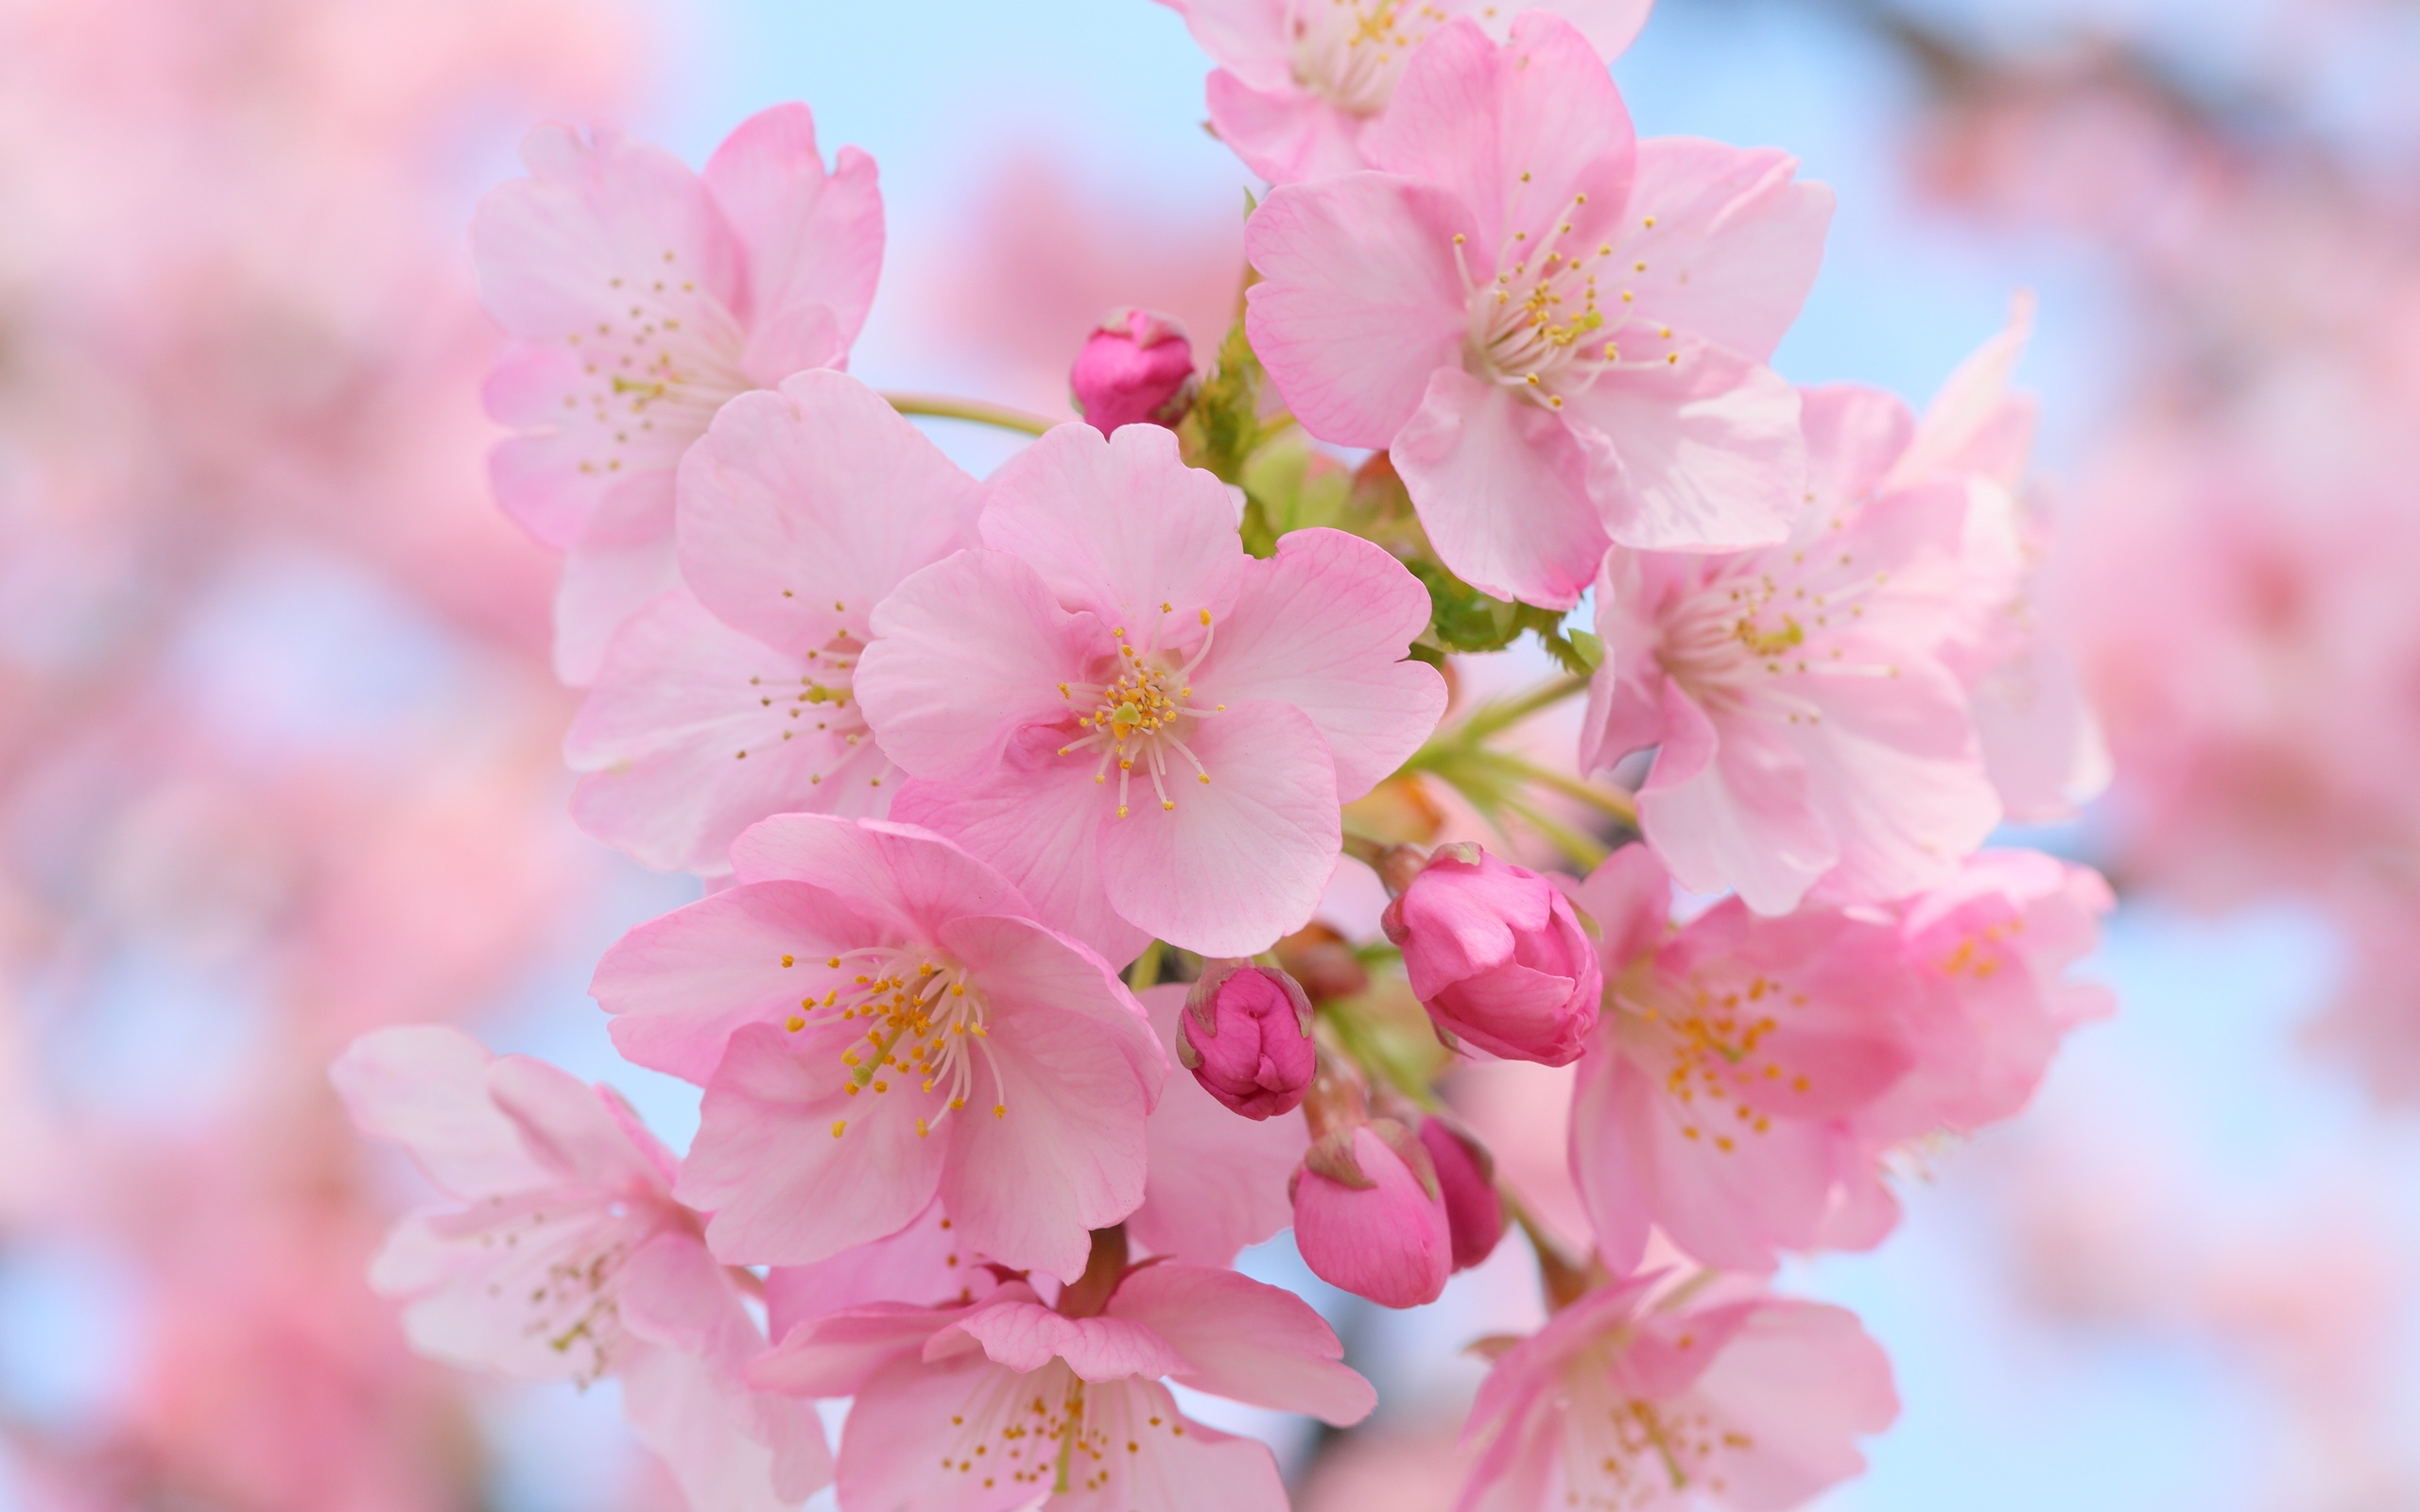 Spring is coming | HD Wallpapers